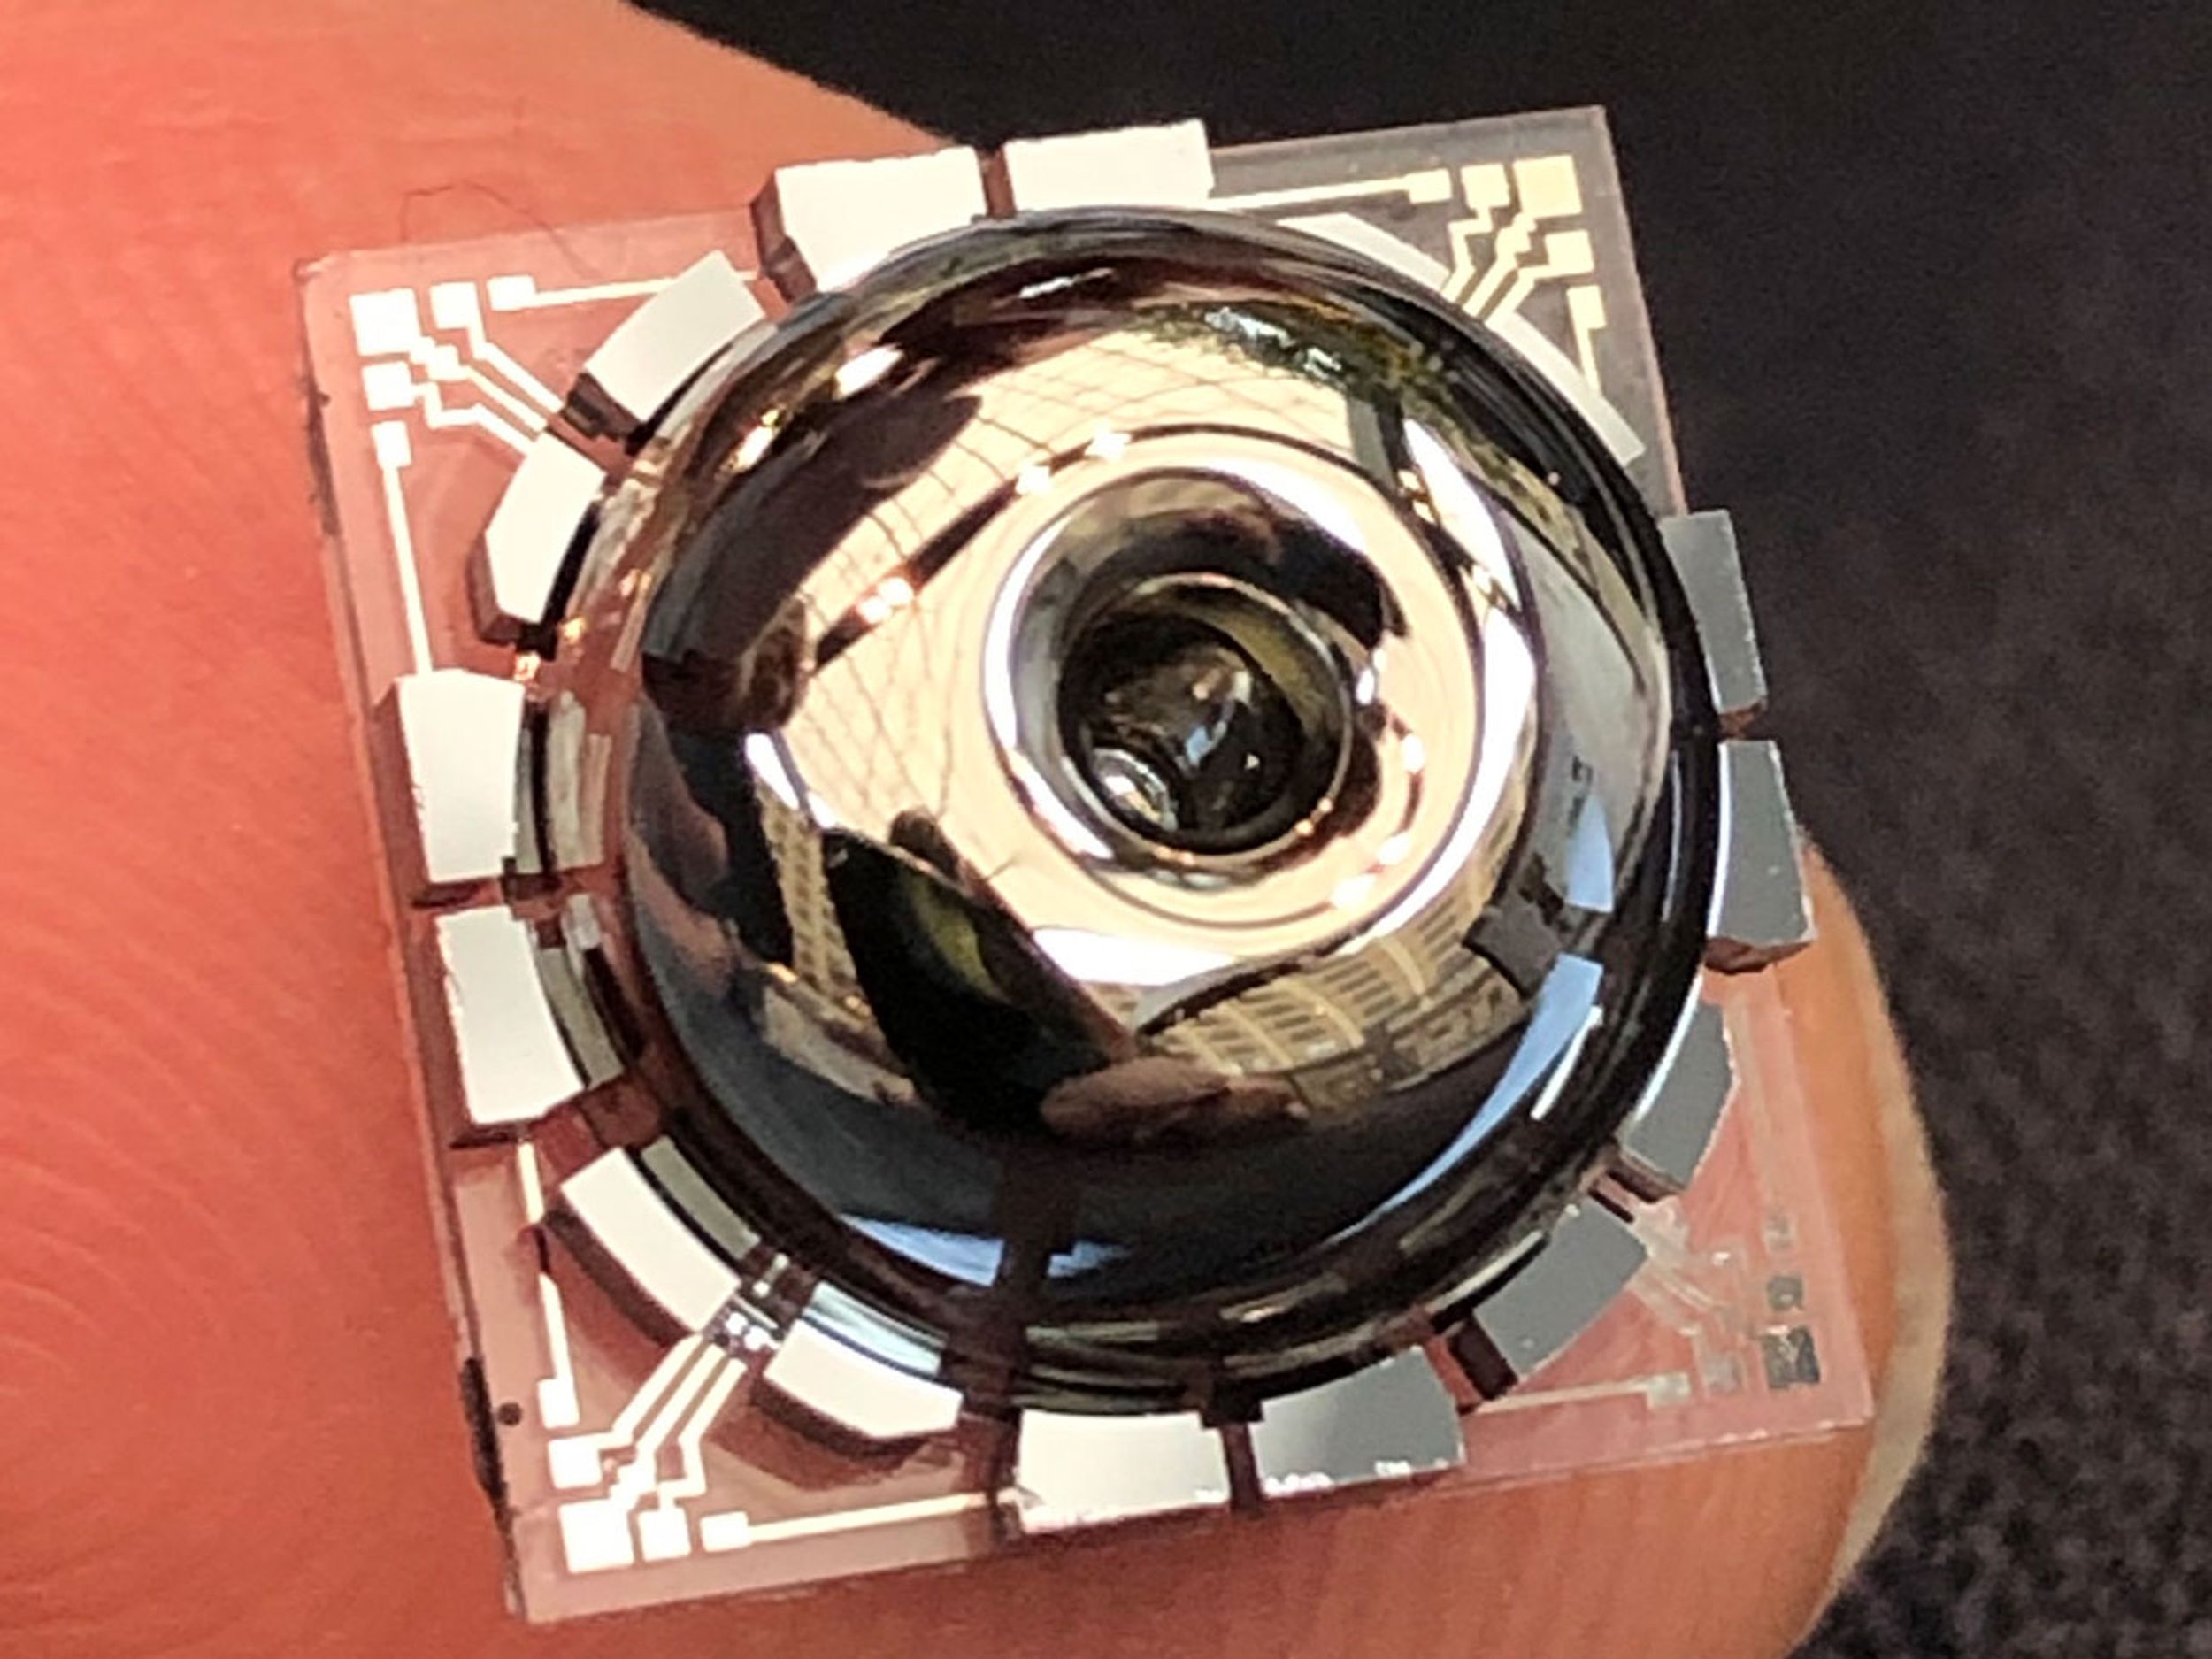 The new resonator and electrodes, on a finger for scale. The resonator is almost perfectly symmetrical, made of nearly-pure glass. This enables it to vibrate for long periods, similar to the ringing of a wine glass.